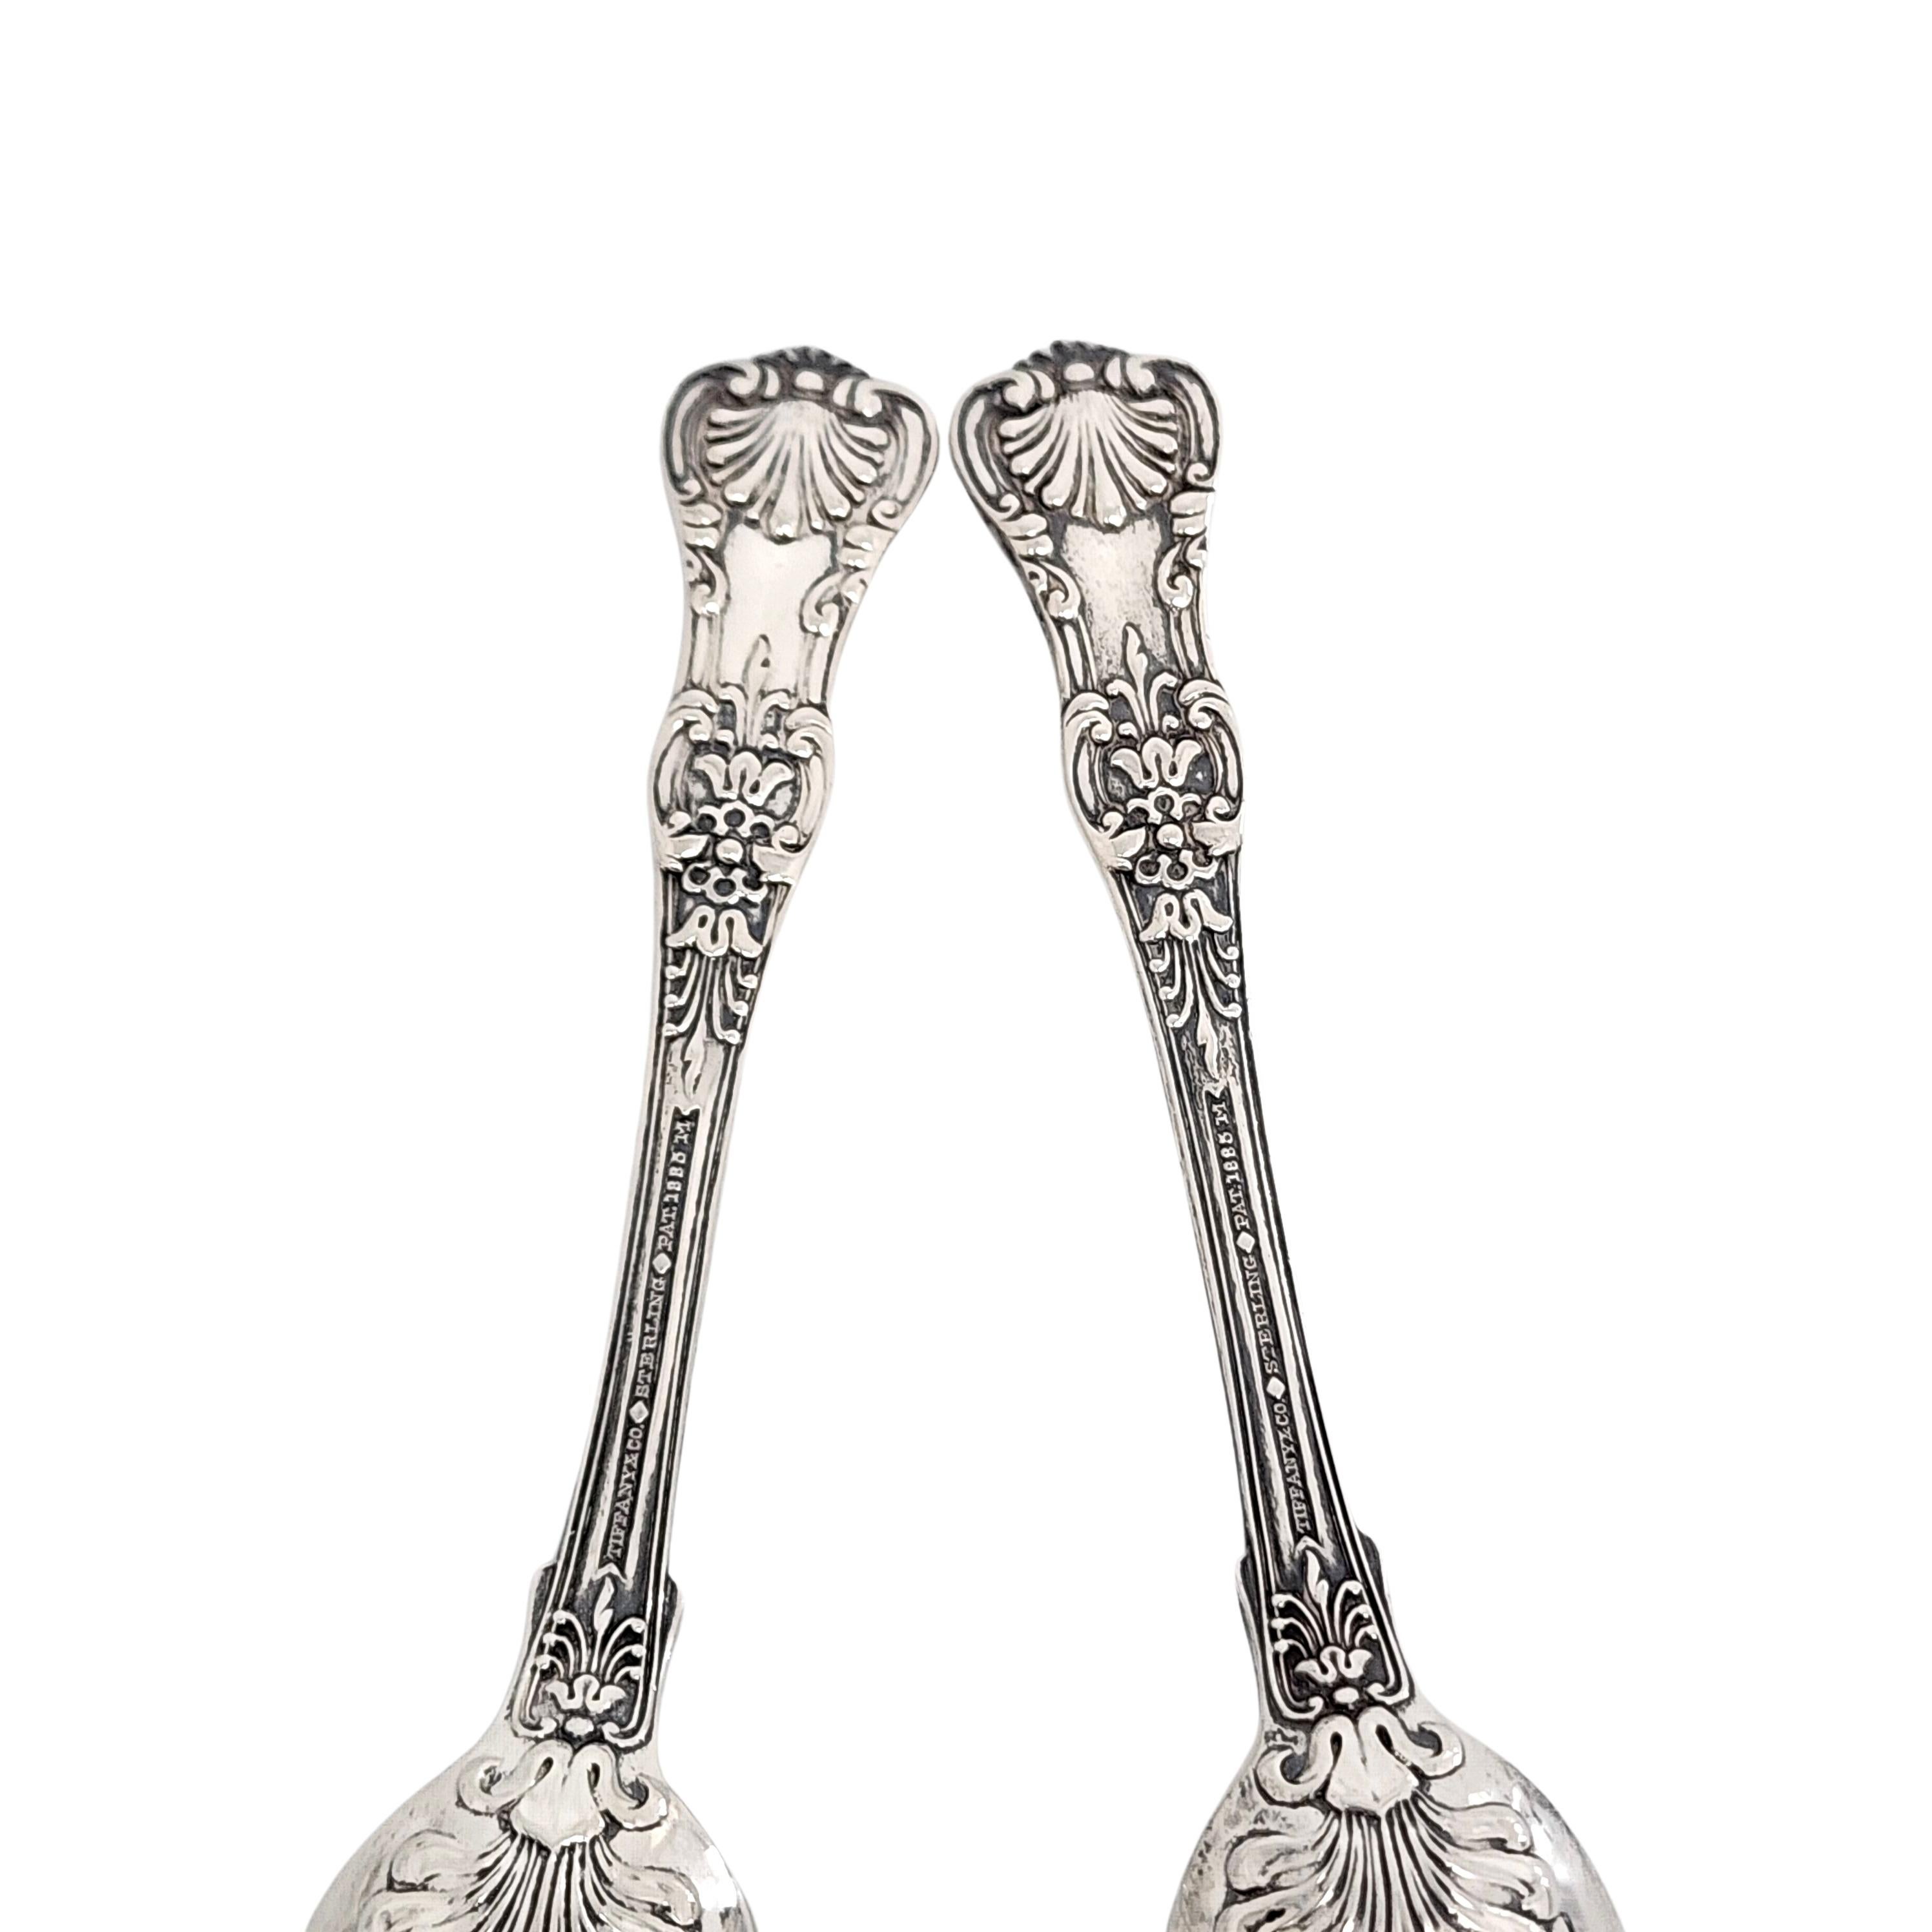 Set of 2 sterling silver demitasse spoons by Tiffany & Co in the English King pattern.

No monogram

Beautiful small demitasse spoons in Tiffany's intricate and decorative version of a King pattern, which were very popular in the late 19th century.